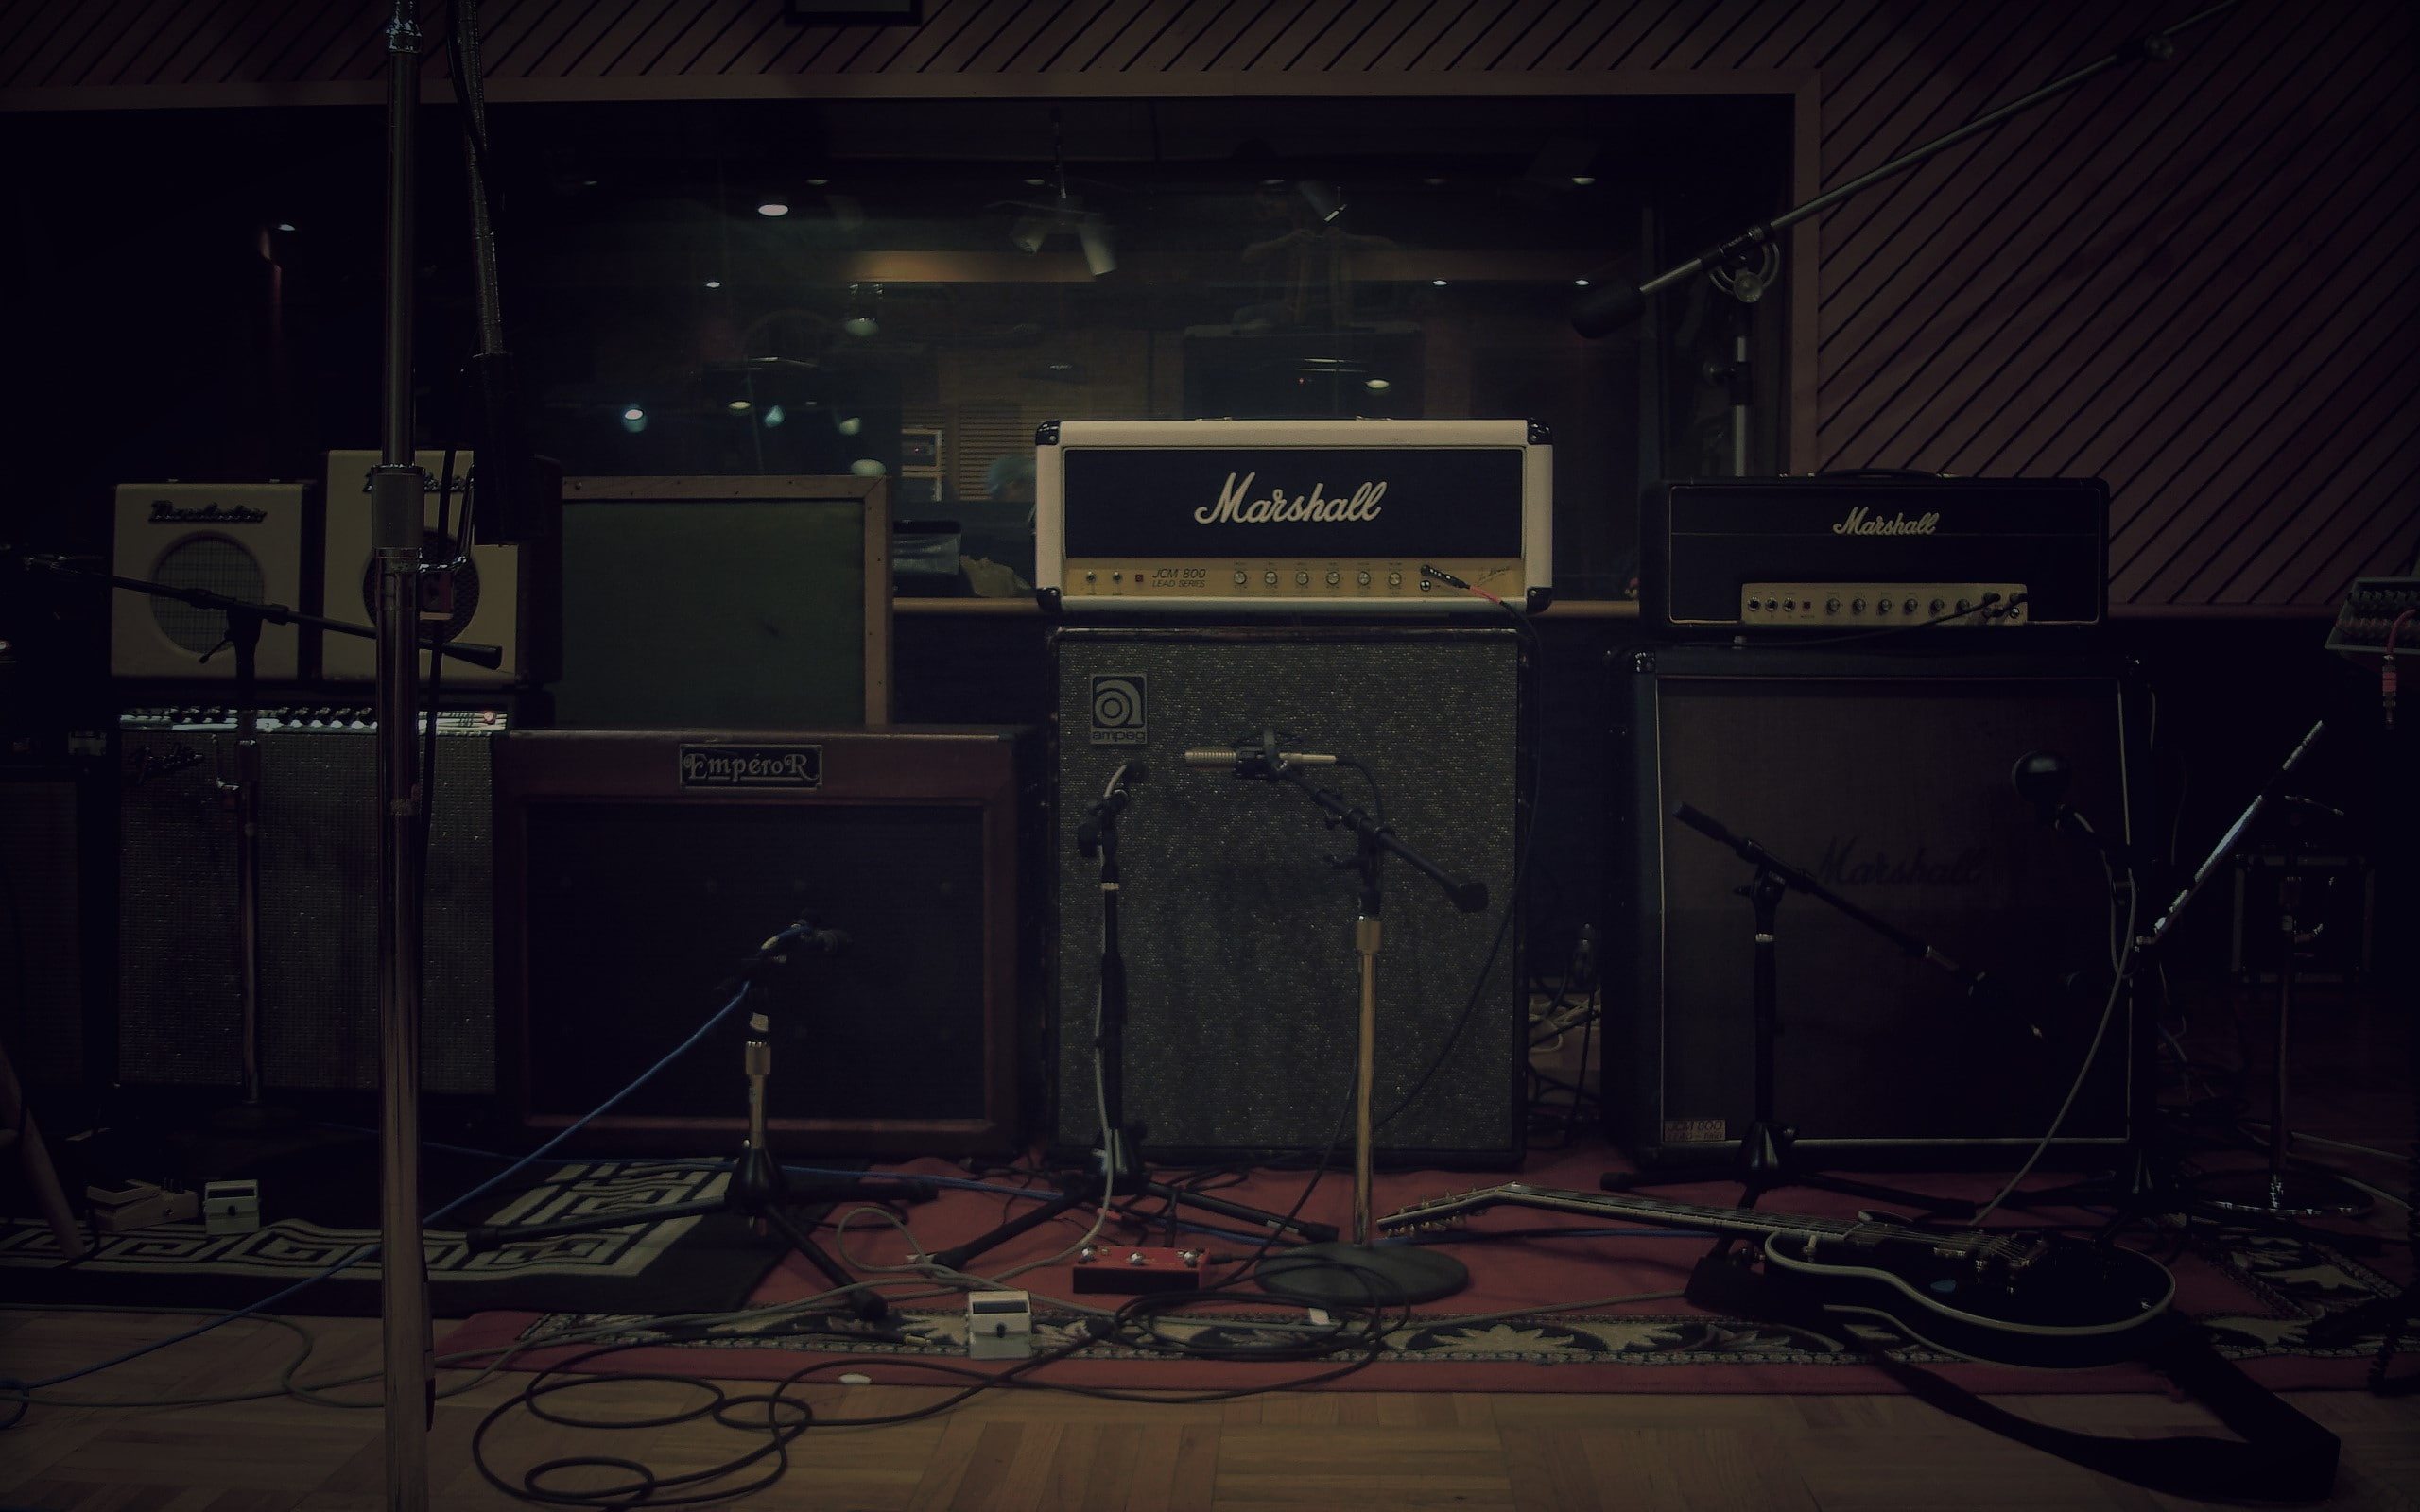 Instruments, Microphones, Studio, Room, Record, music, technology